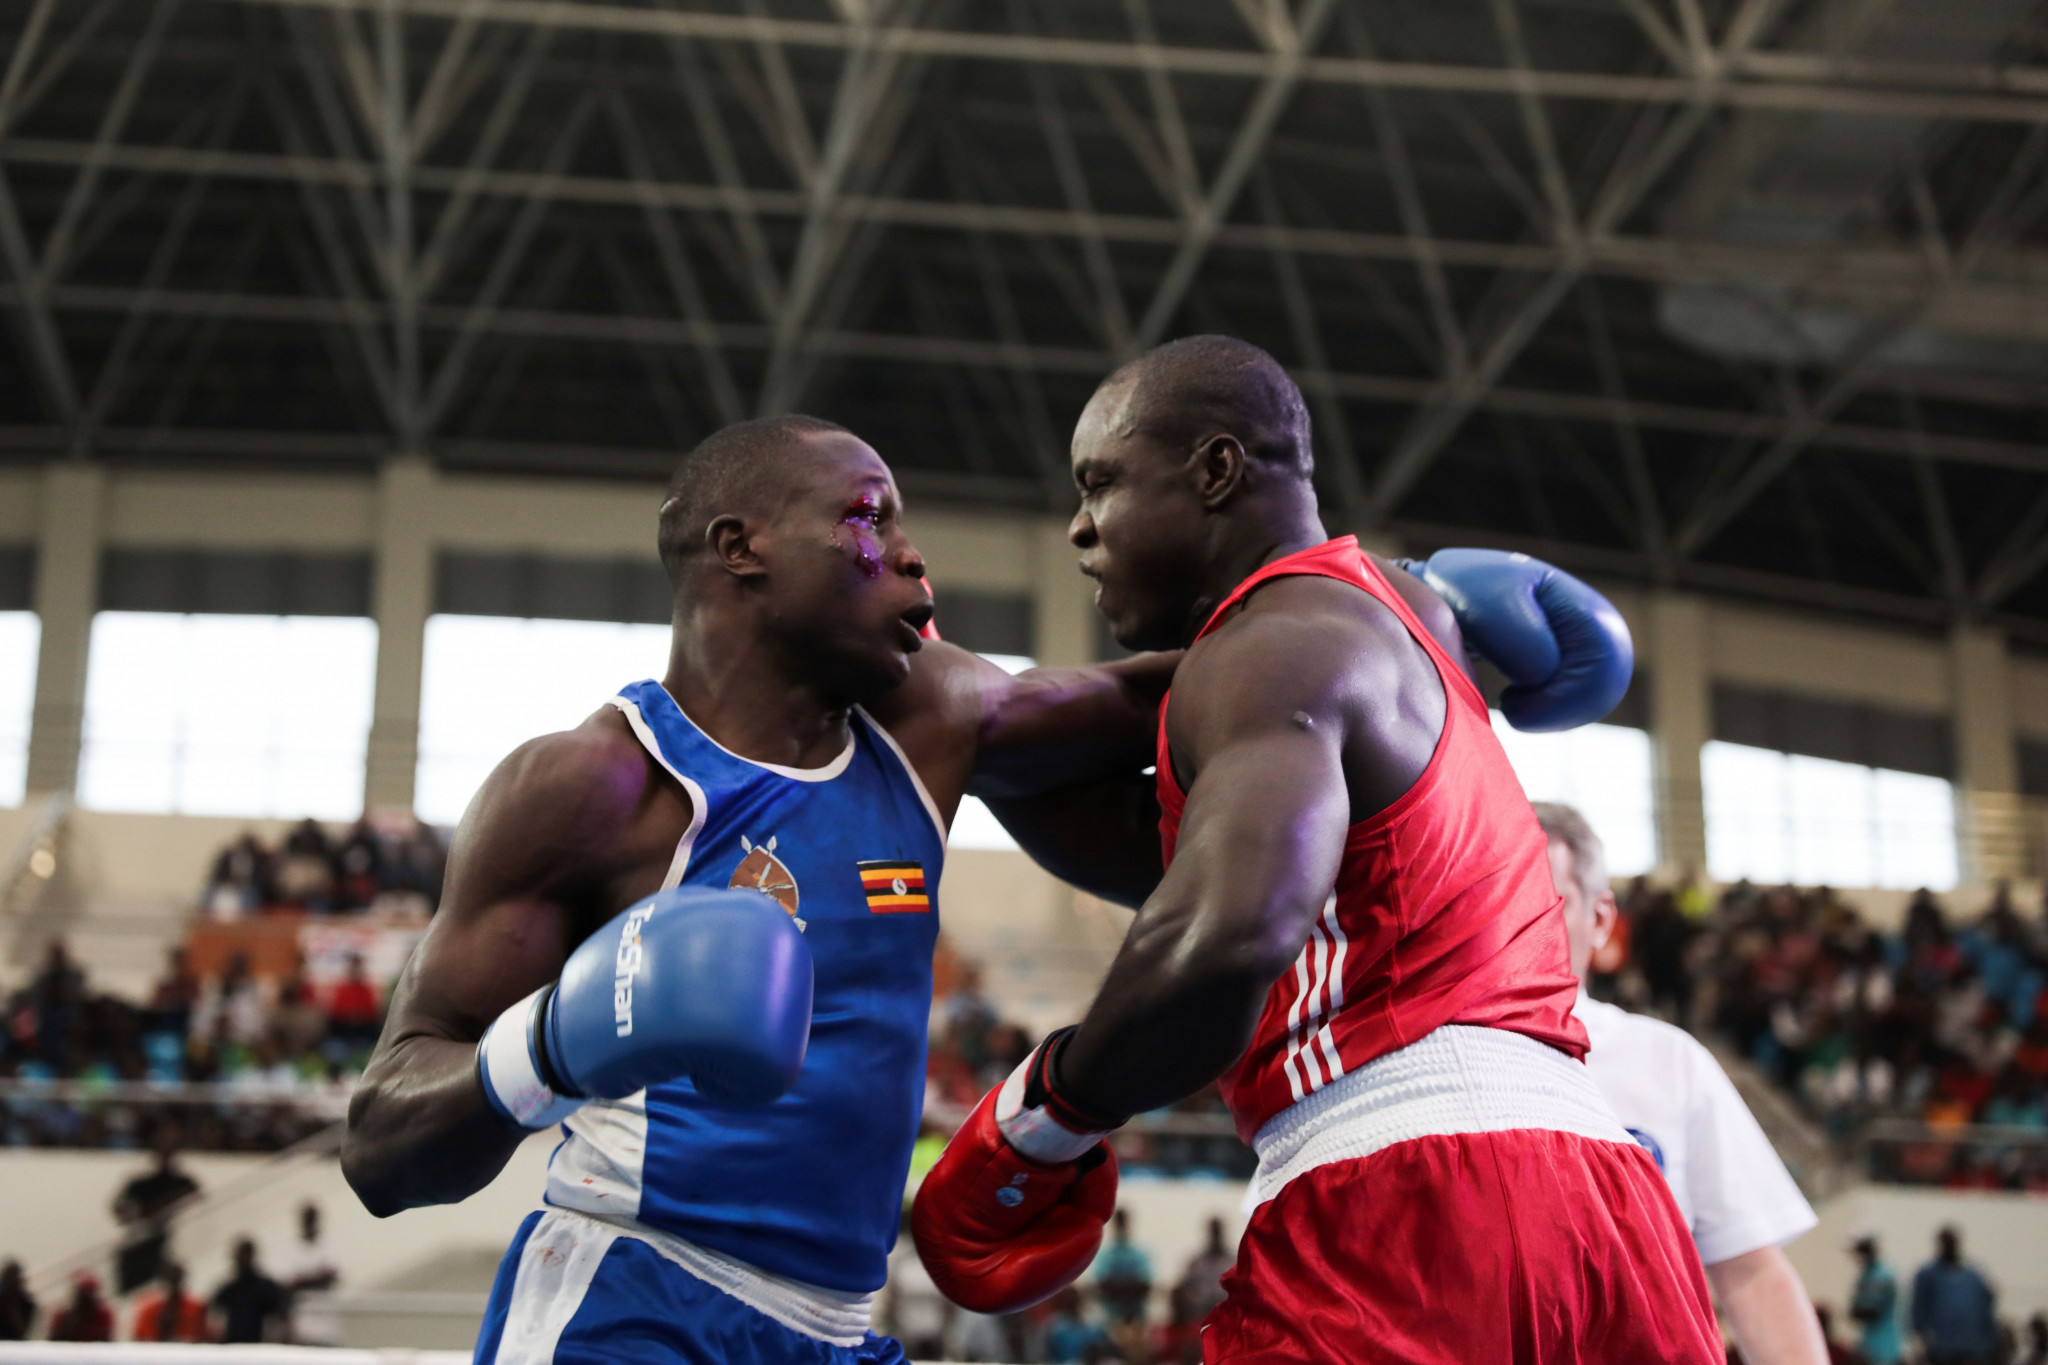 Uganda to lodge complaint to AIBA over omission of fighter from World Championships entry list